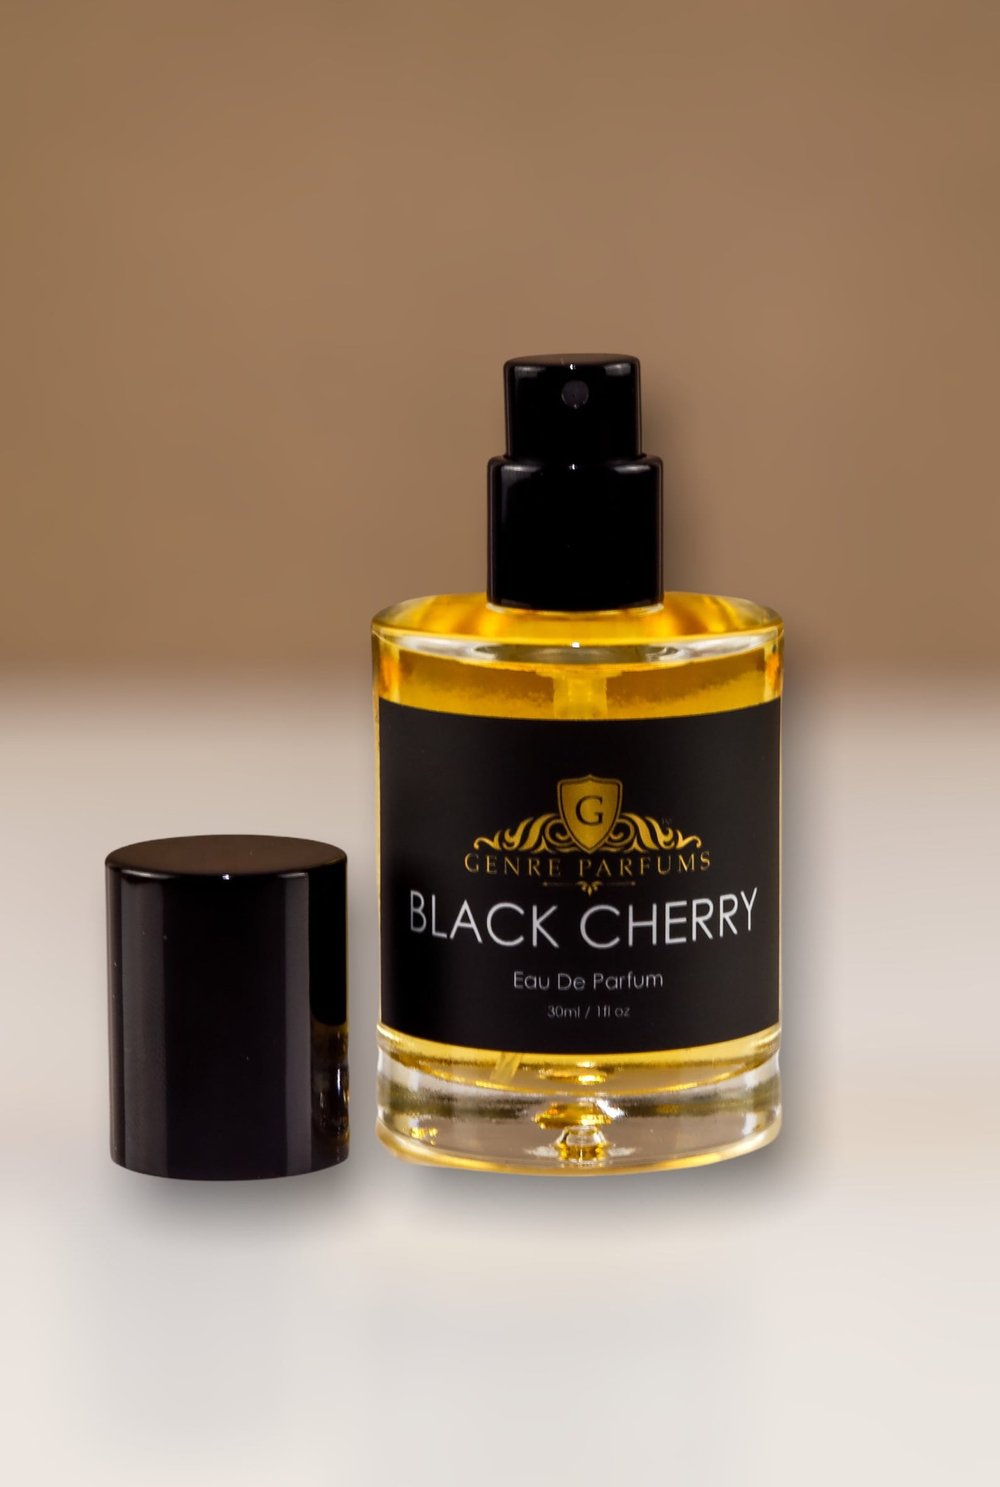 rissywoo — 10 Black-Owned Fragrance Brands to Try